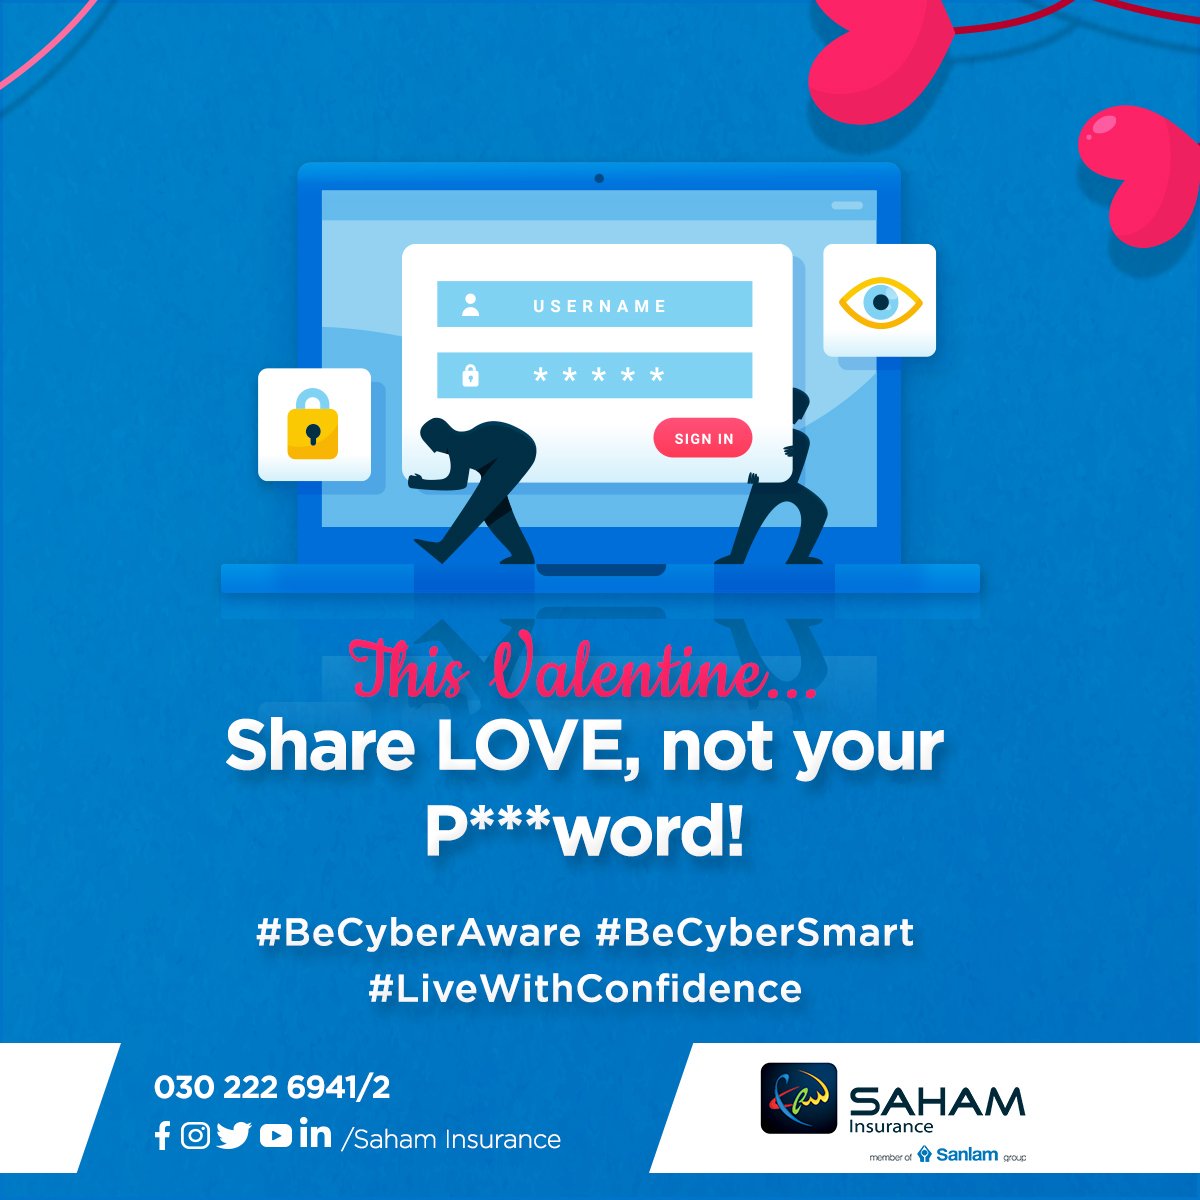 Today is #CyberSmart Thursday!👁️
.
As you share your LOVE this season, protect your passwords!
.
.
#SahamInsurance #BeCyberAware #BeCyberSmart #ValsDay #LiveWithConfidence